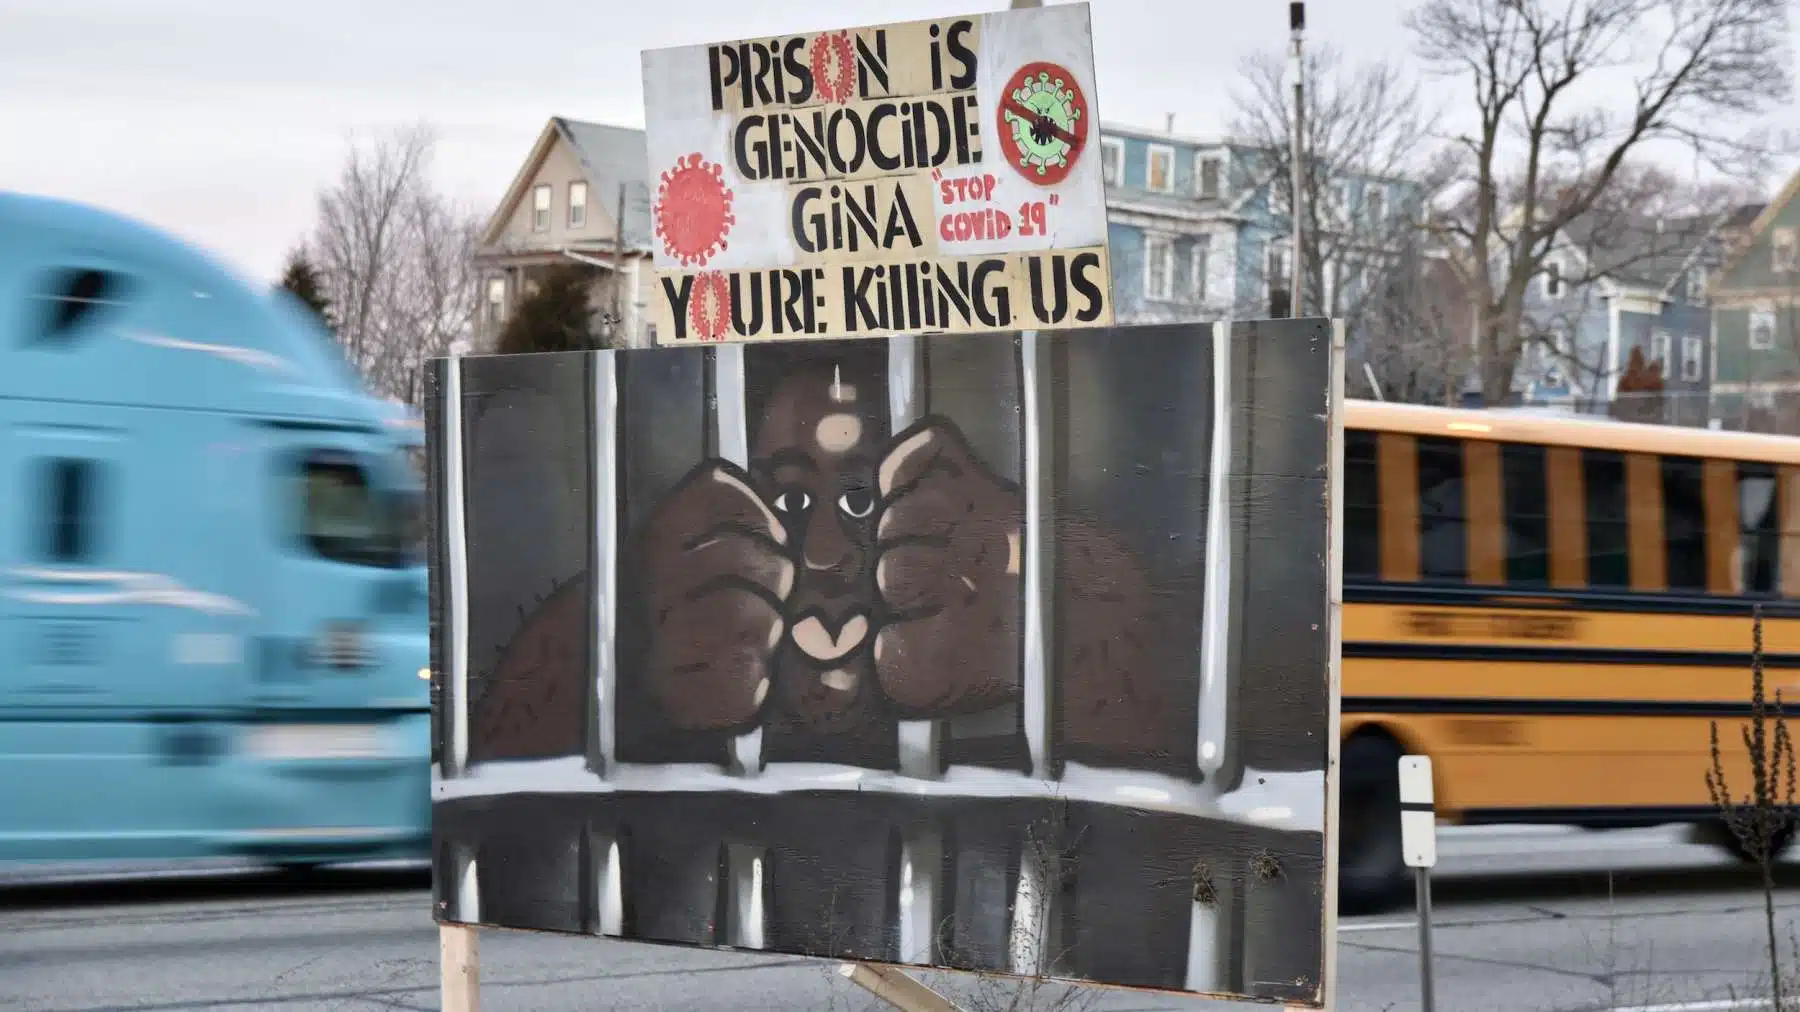 Highway signs reading “Prison is Genocide” and “Gina You’re Killing Us” placed over night